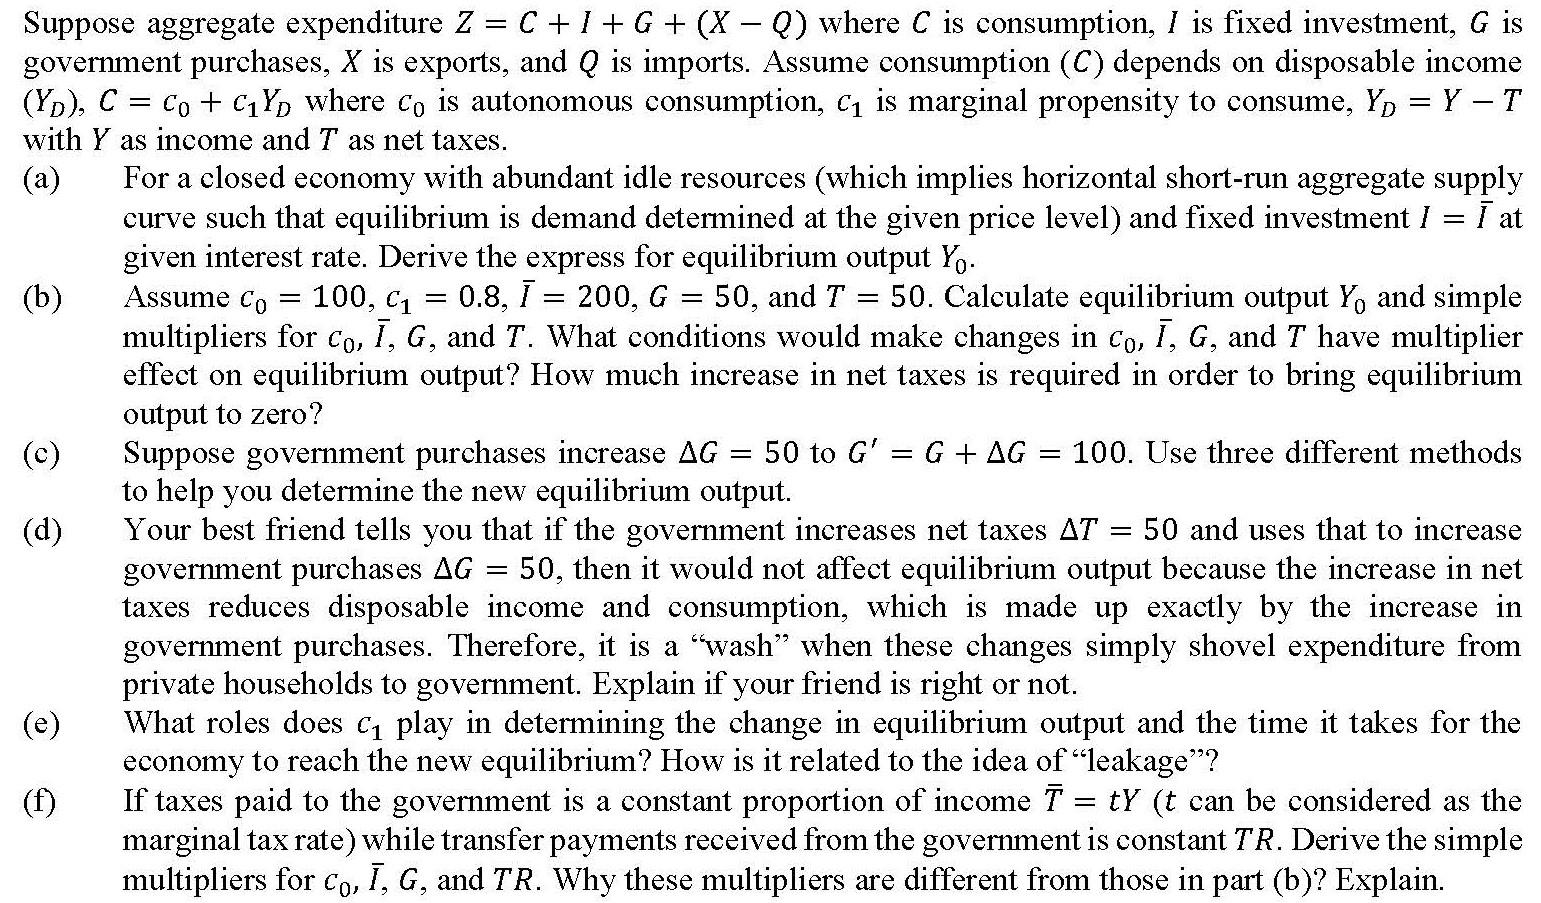 Suppose aggregate expenditure Z=C+I+G+ (XQ) where C is consumption, I is fixed investment, G is government